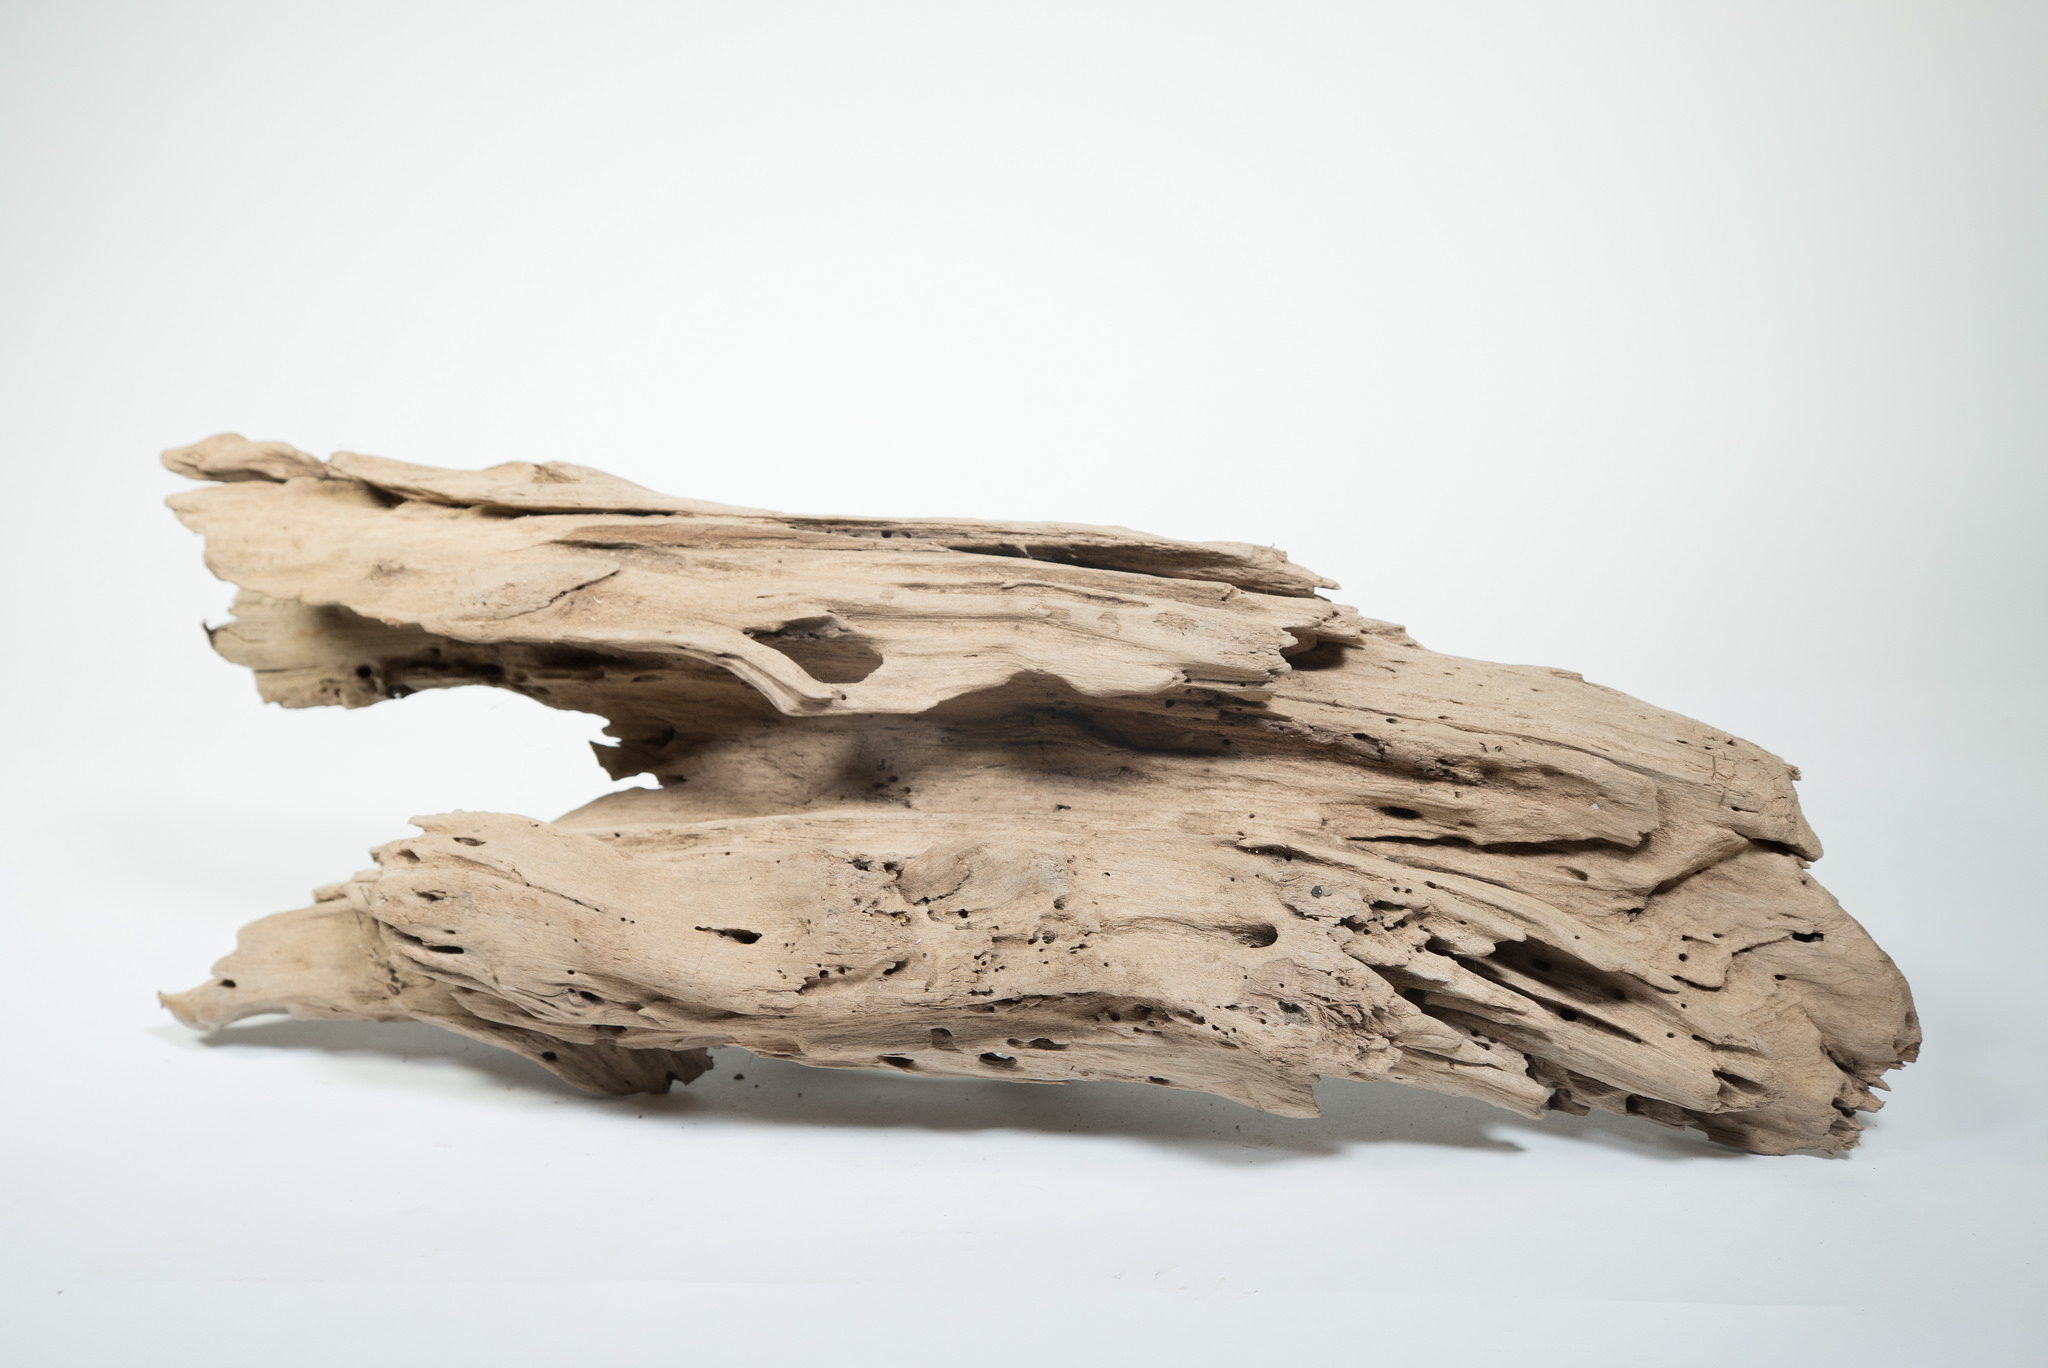 More Driftwood